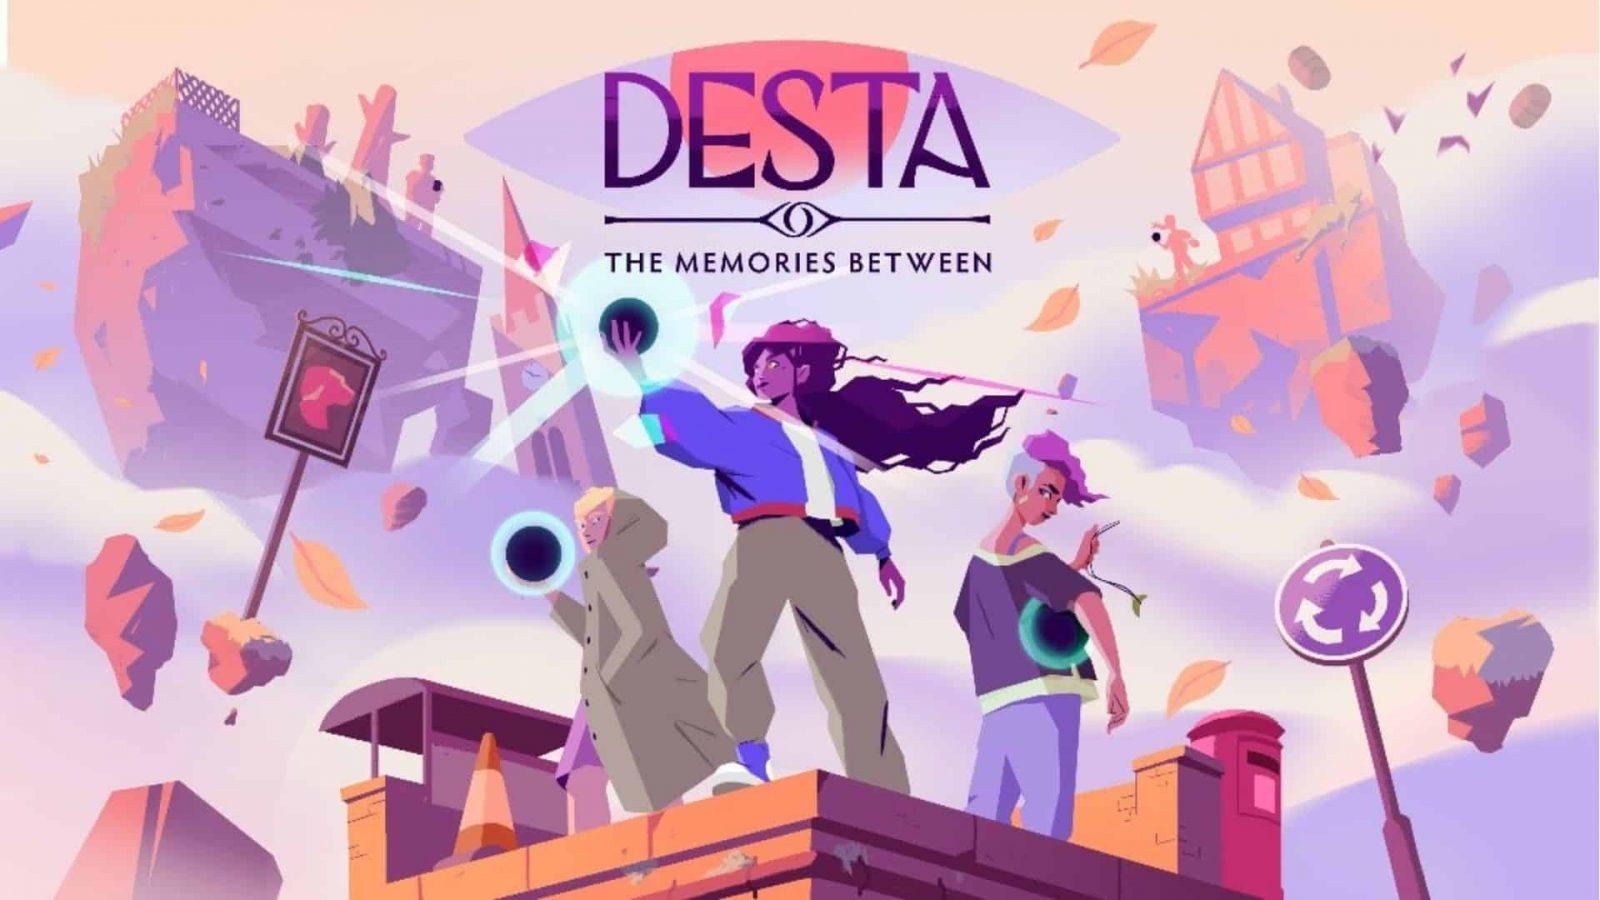 official cover art for desta the memories between revealed